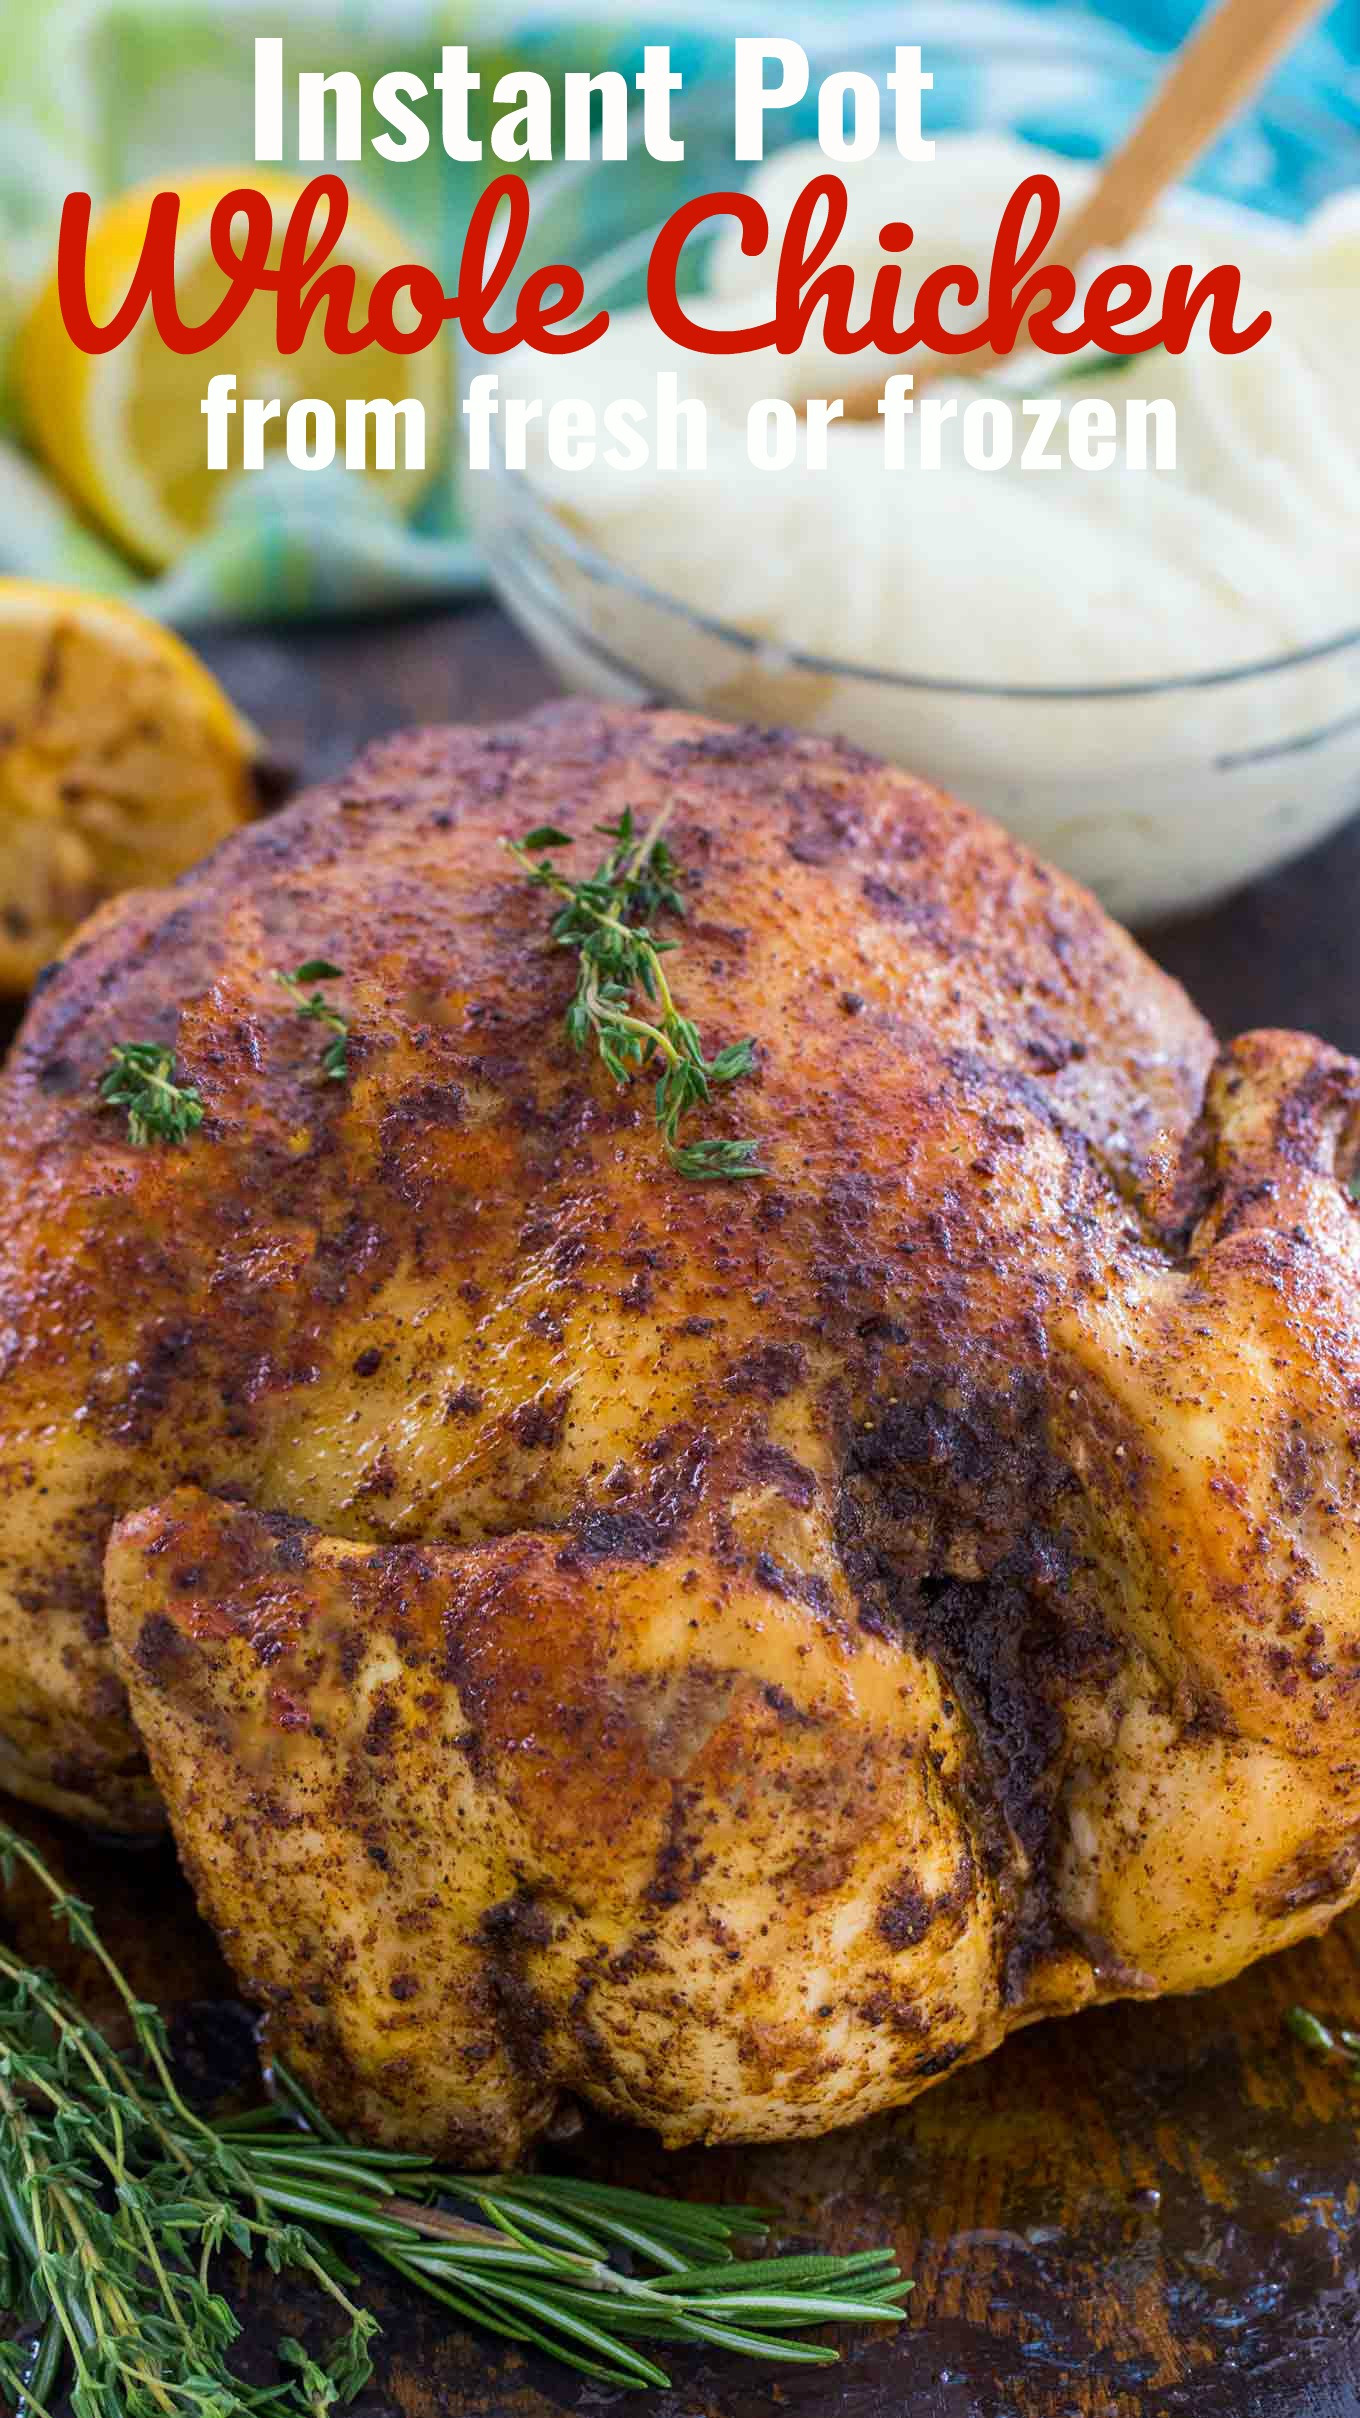 Cooking A Whole Chicken In The Instant Pot
 Instant Pot Whole Chicken Recipe Fresh or Frozen Video